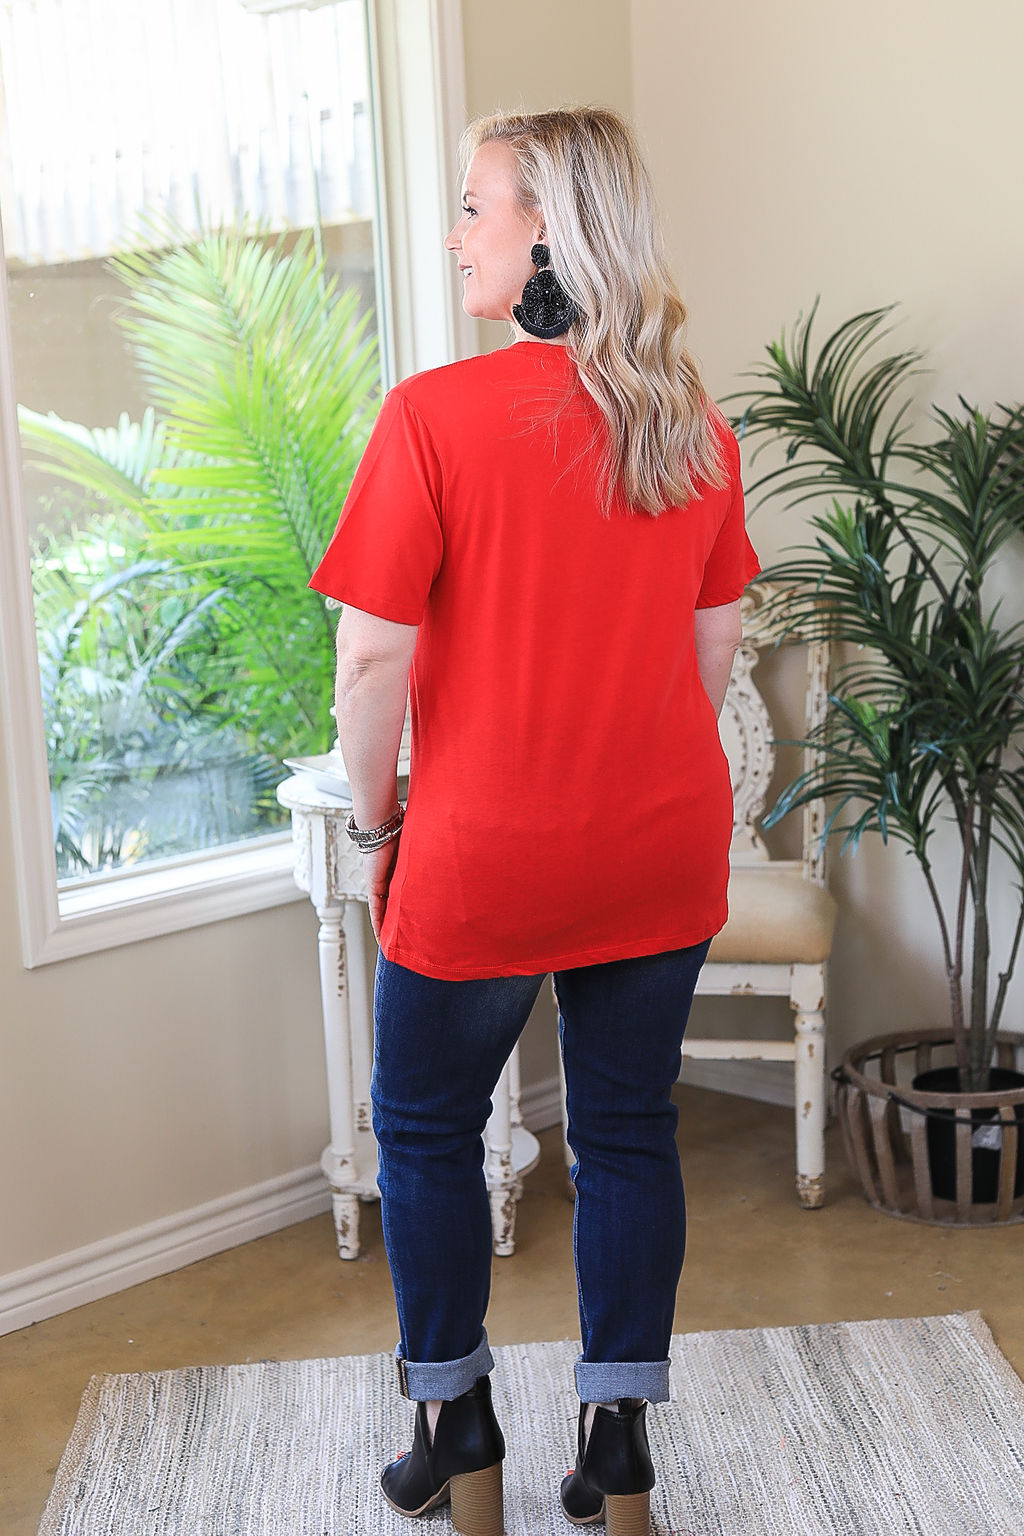 ACDC | High Voltage Keyhole & Lace Up Band Tee in Red - Giddy Up Glamour Boutique